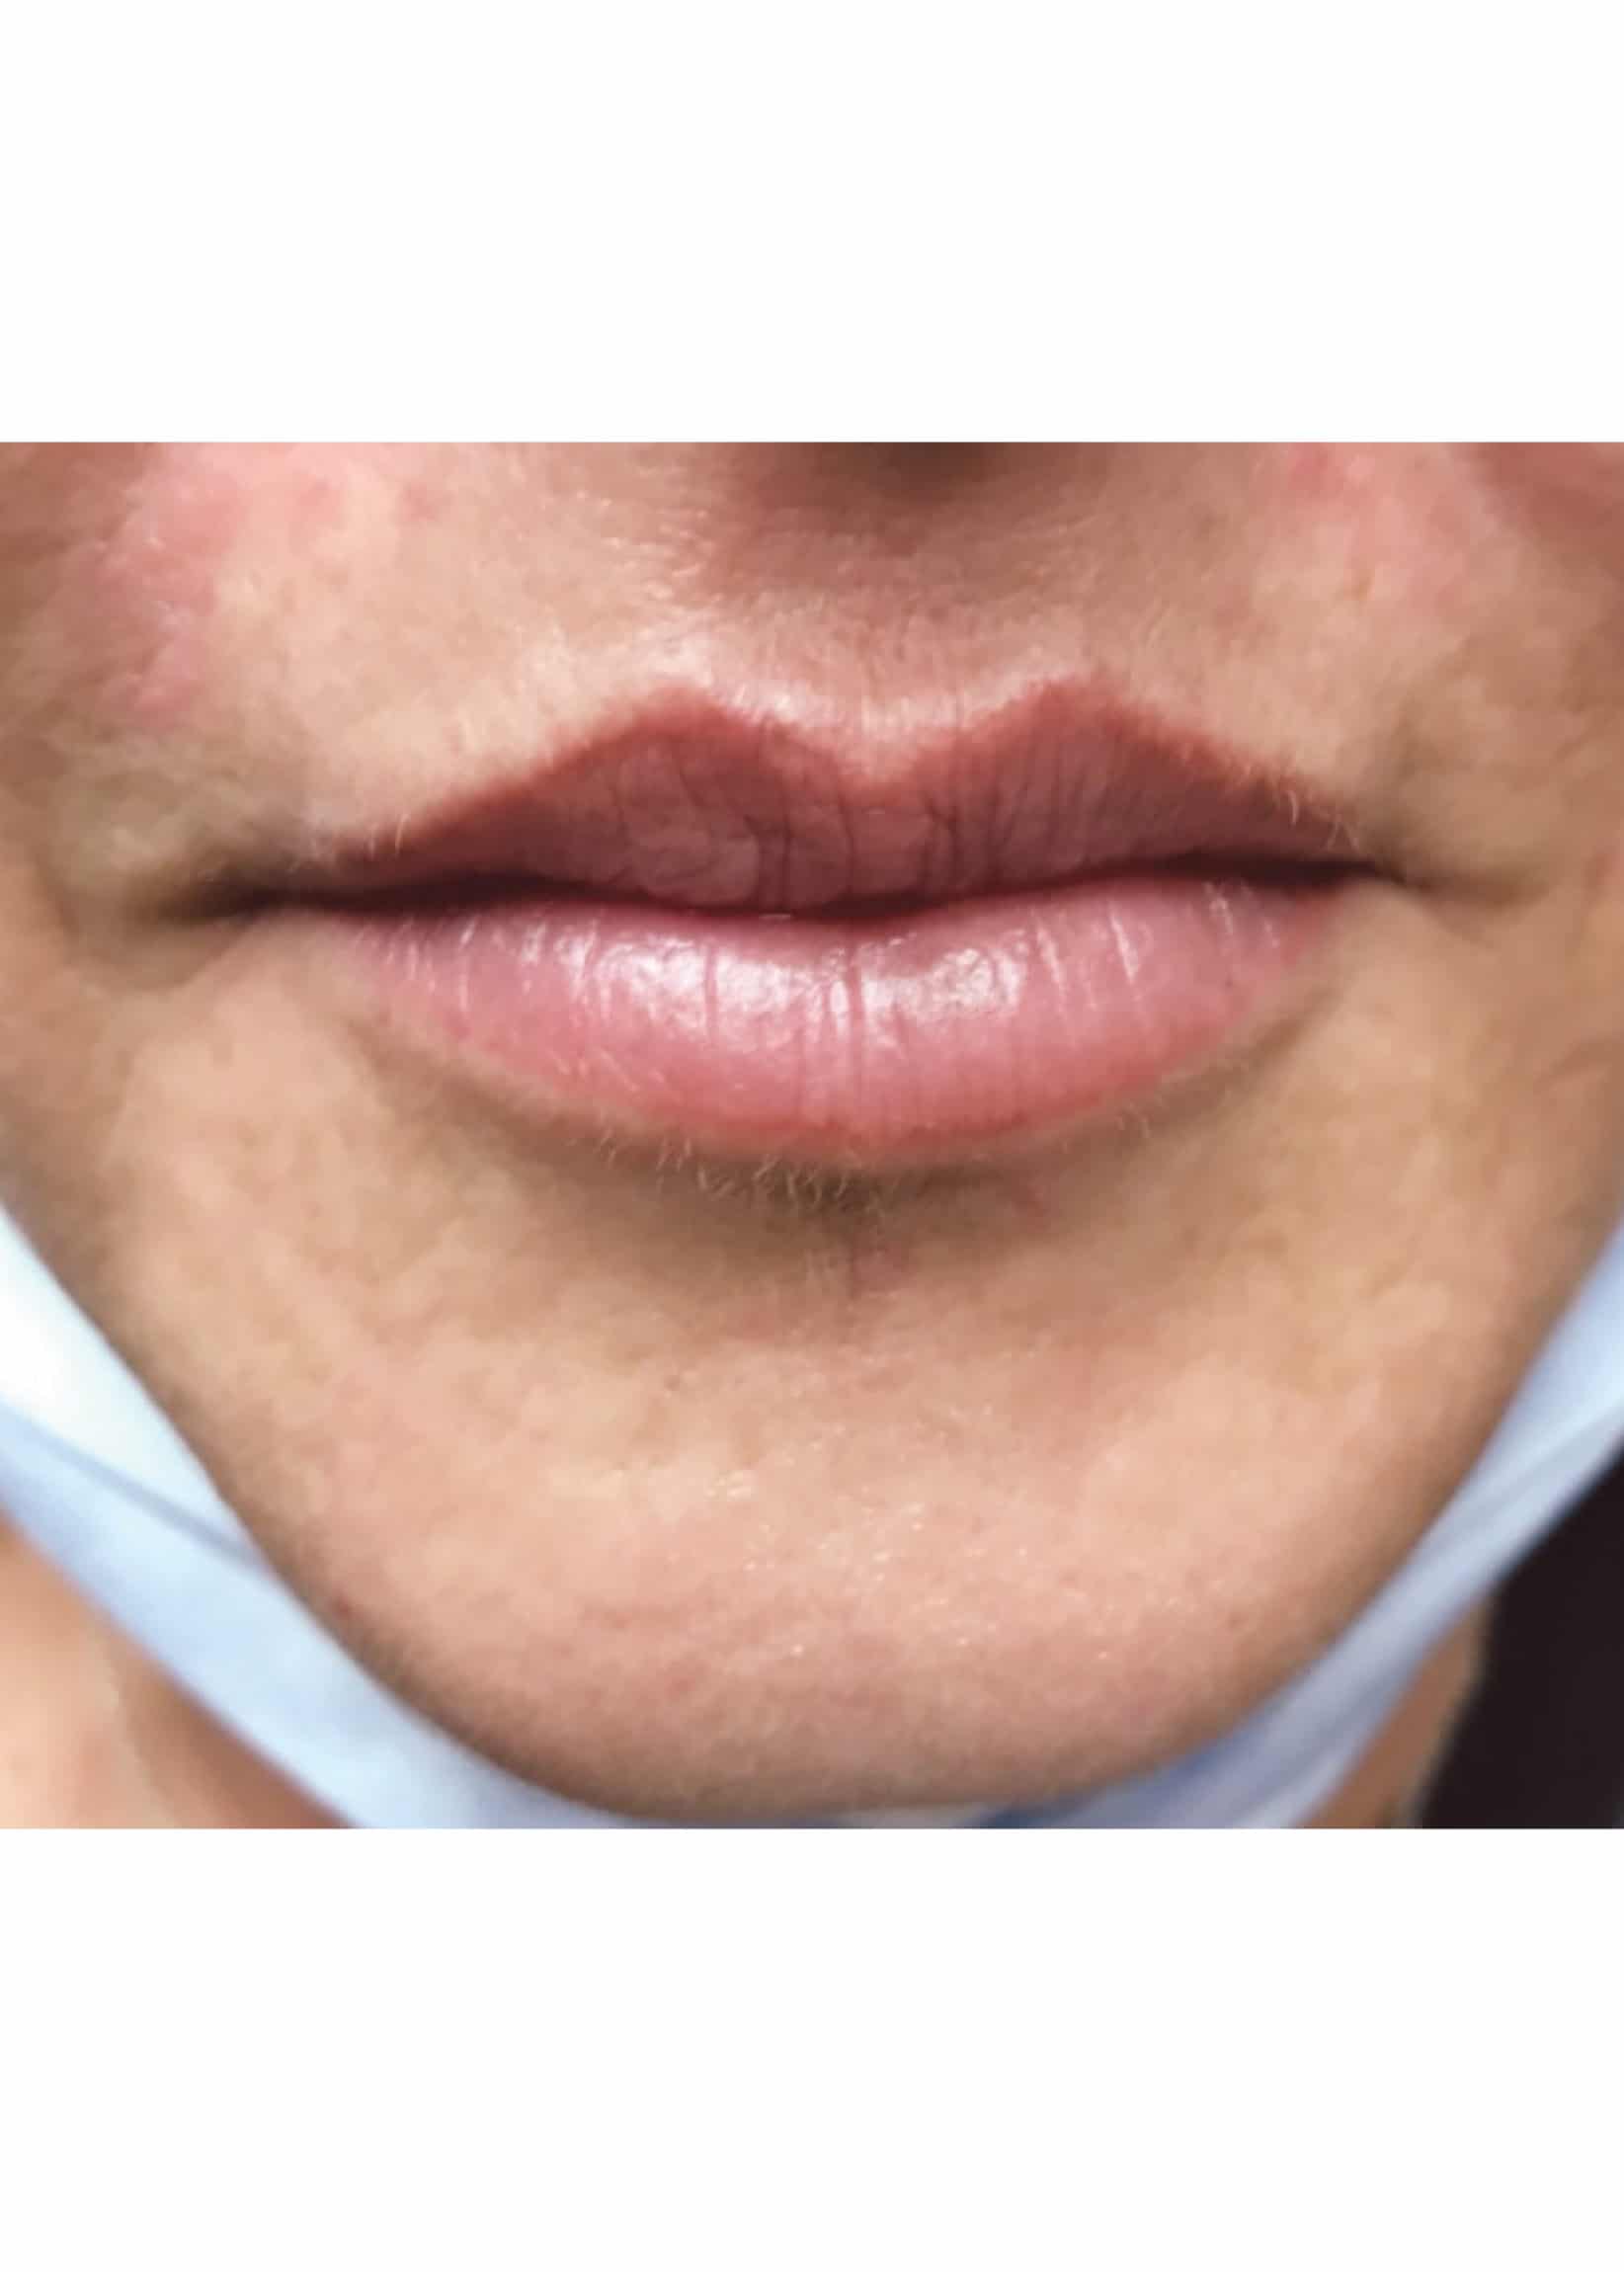 TheSkinCenter ProviderPages JonnaBlum LipFiller Before 2 scaled 1